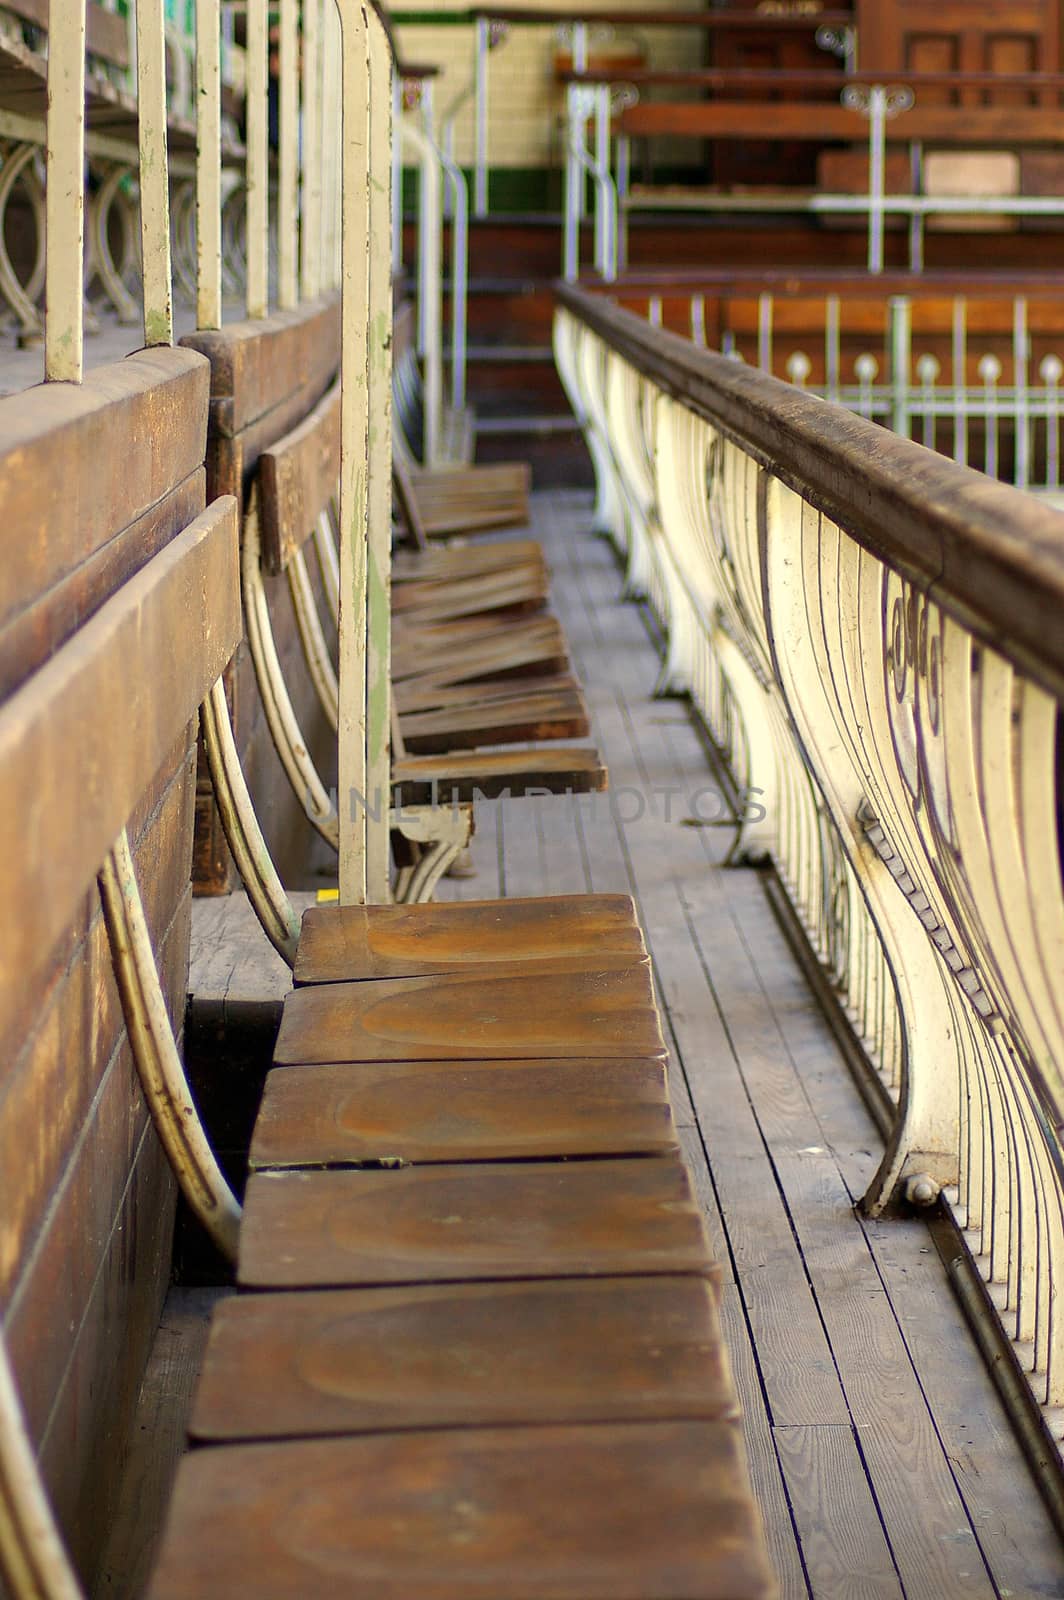 Row of old wooden seats and safety railing